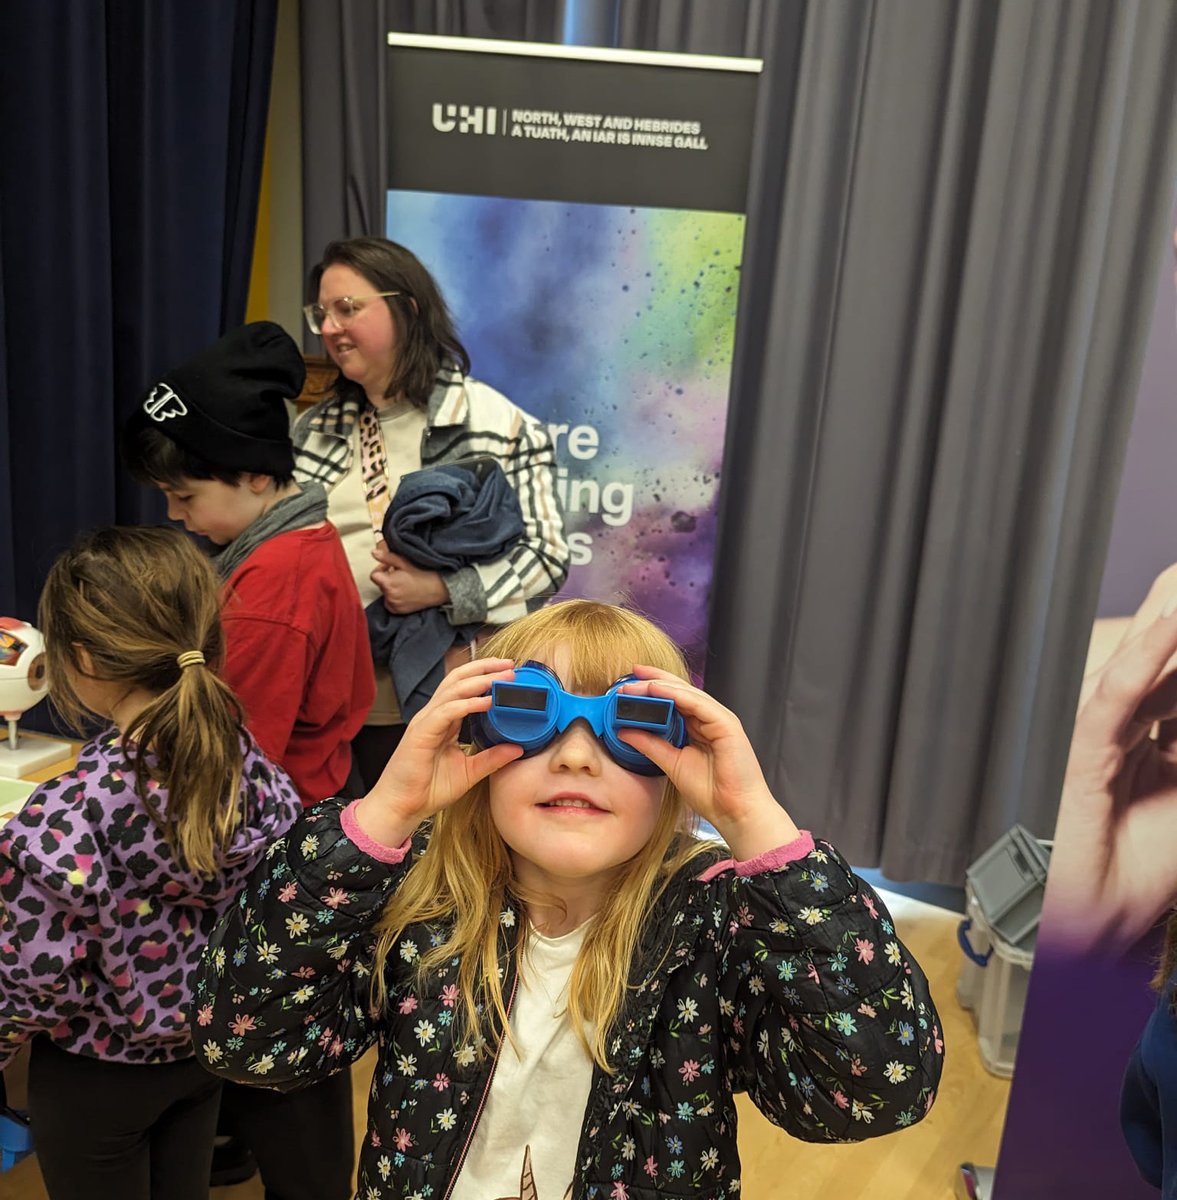 We were delighted to be part of the recent Science Fair in Stornoway created by our colleagues @cne_siar.

Our STEM officer and lecturers were excited to meet with local children to chat all things Science, Technology, Engineering & Maths! 

#Thinkuhi #UHINWH #UHISTEM #stem